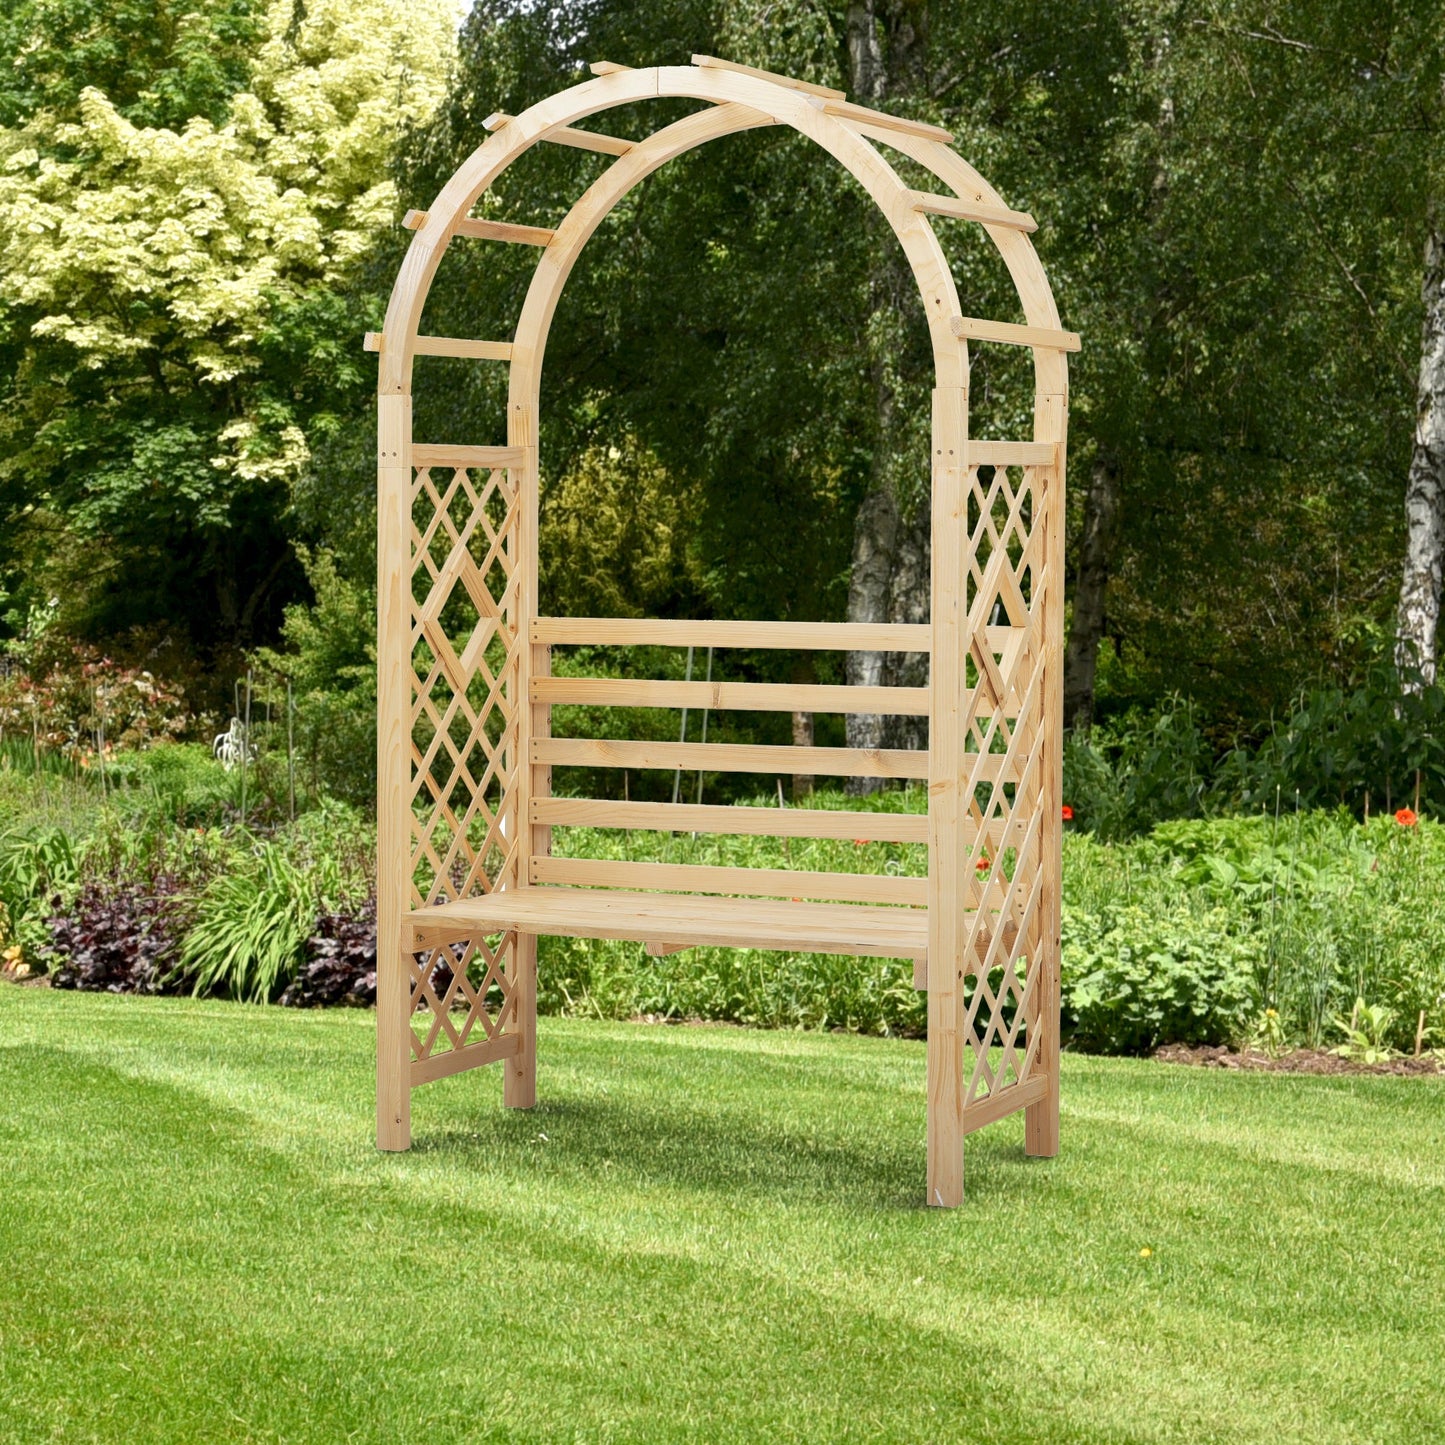 Garden Bench with Arch Wooden Bench Trellis for Vines/ Climbing Plants for Patio Furniture, Front Porch Decor, Garden Arbor and Outdoor Garden Seating, Nature at Gallery Canada